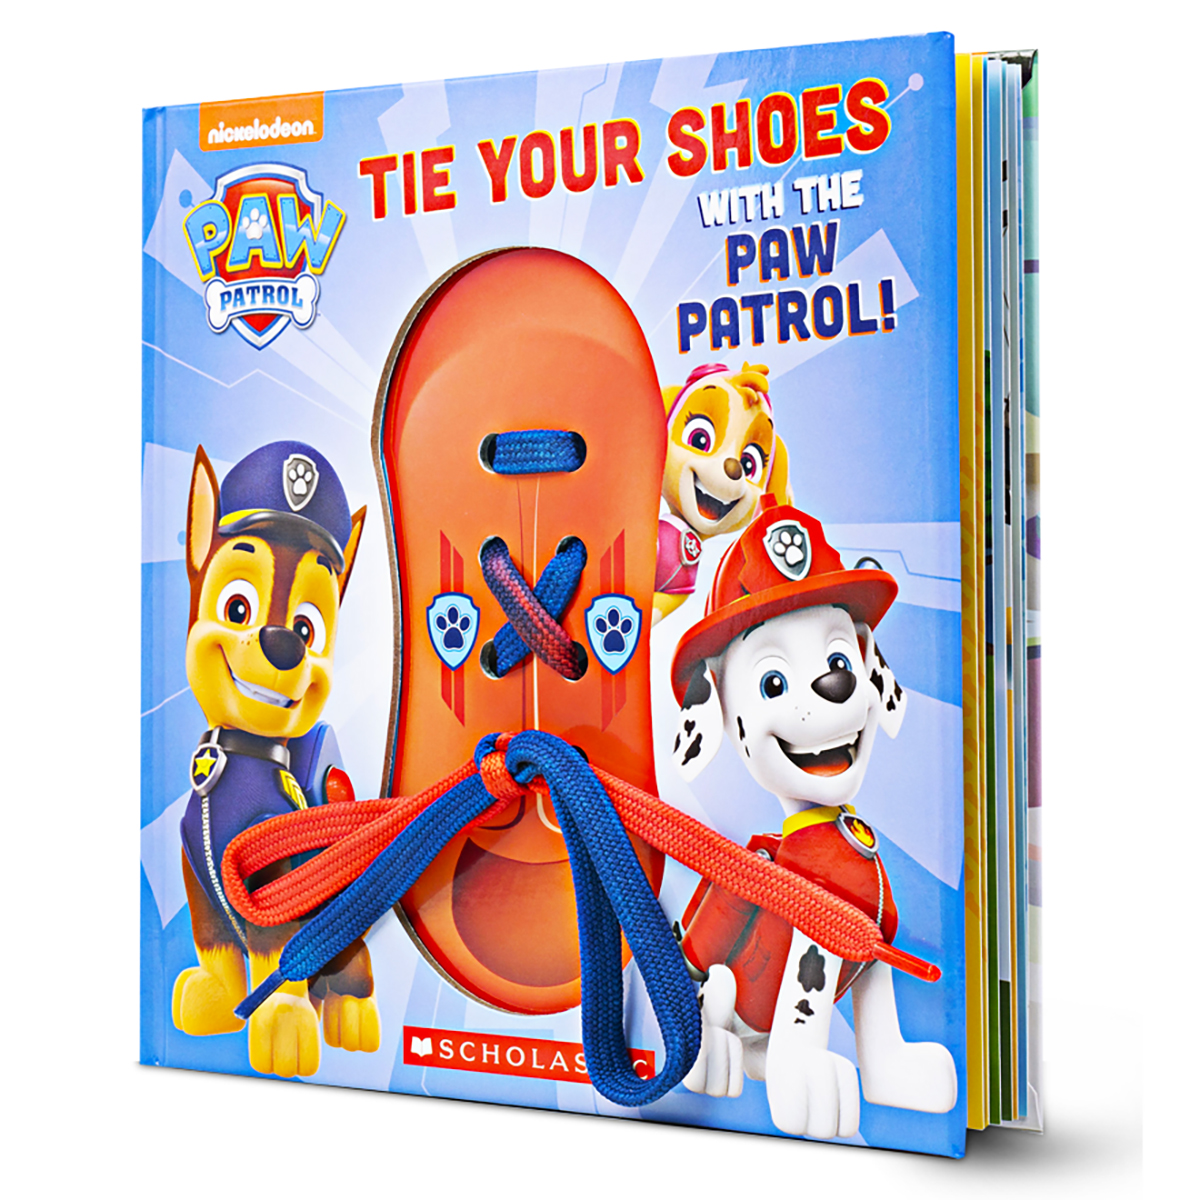  Tie Your Shoes with the Paw Patrol 